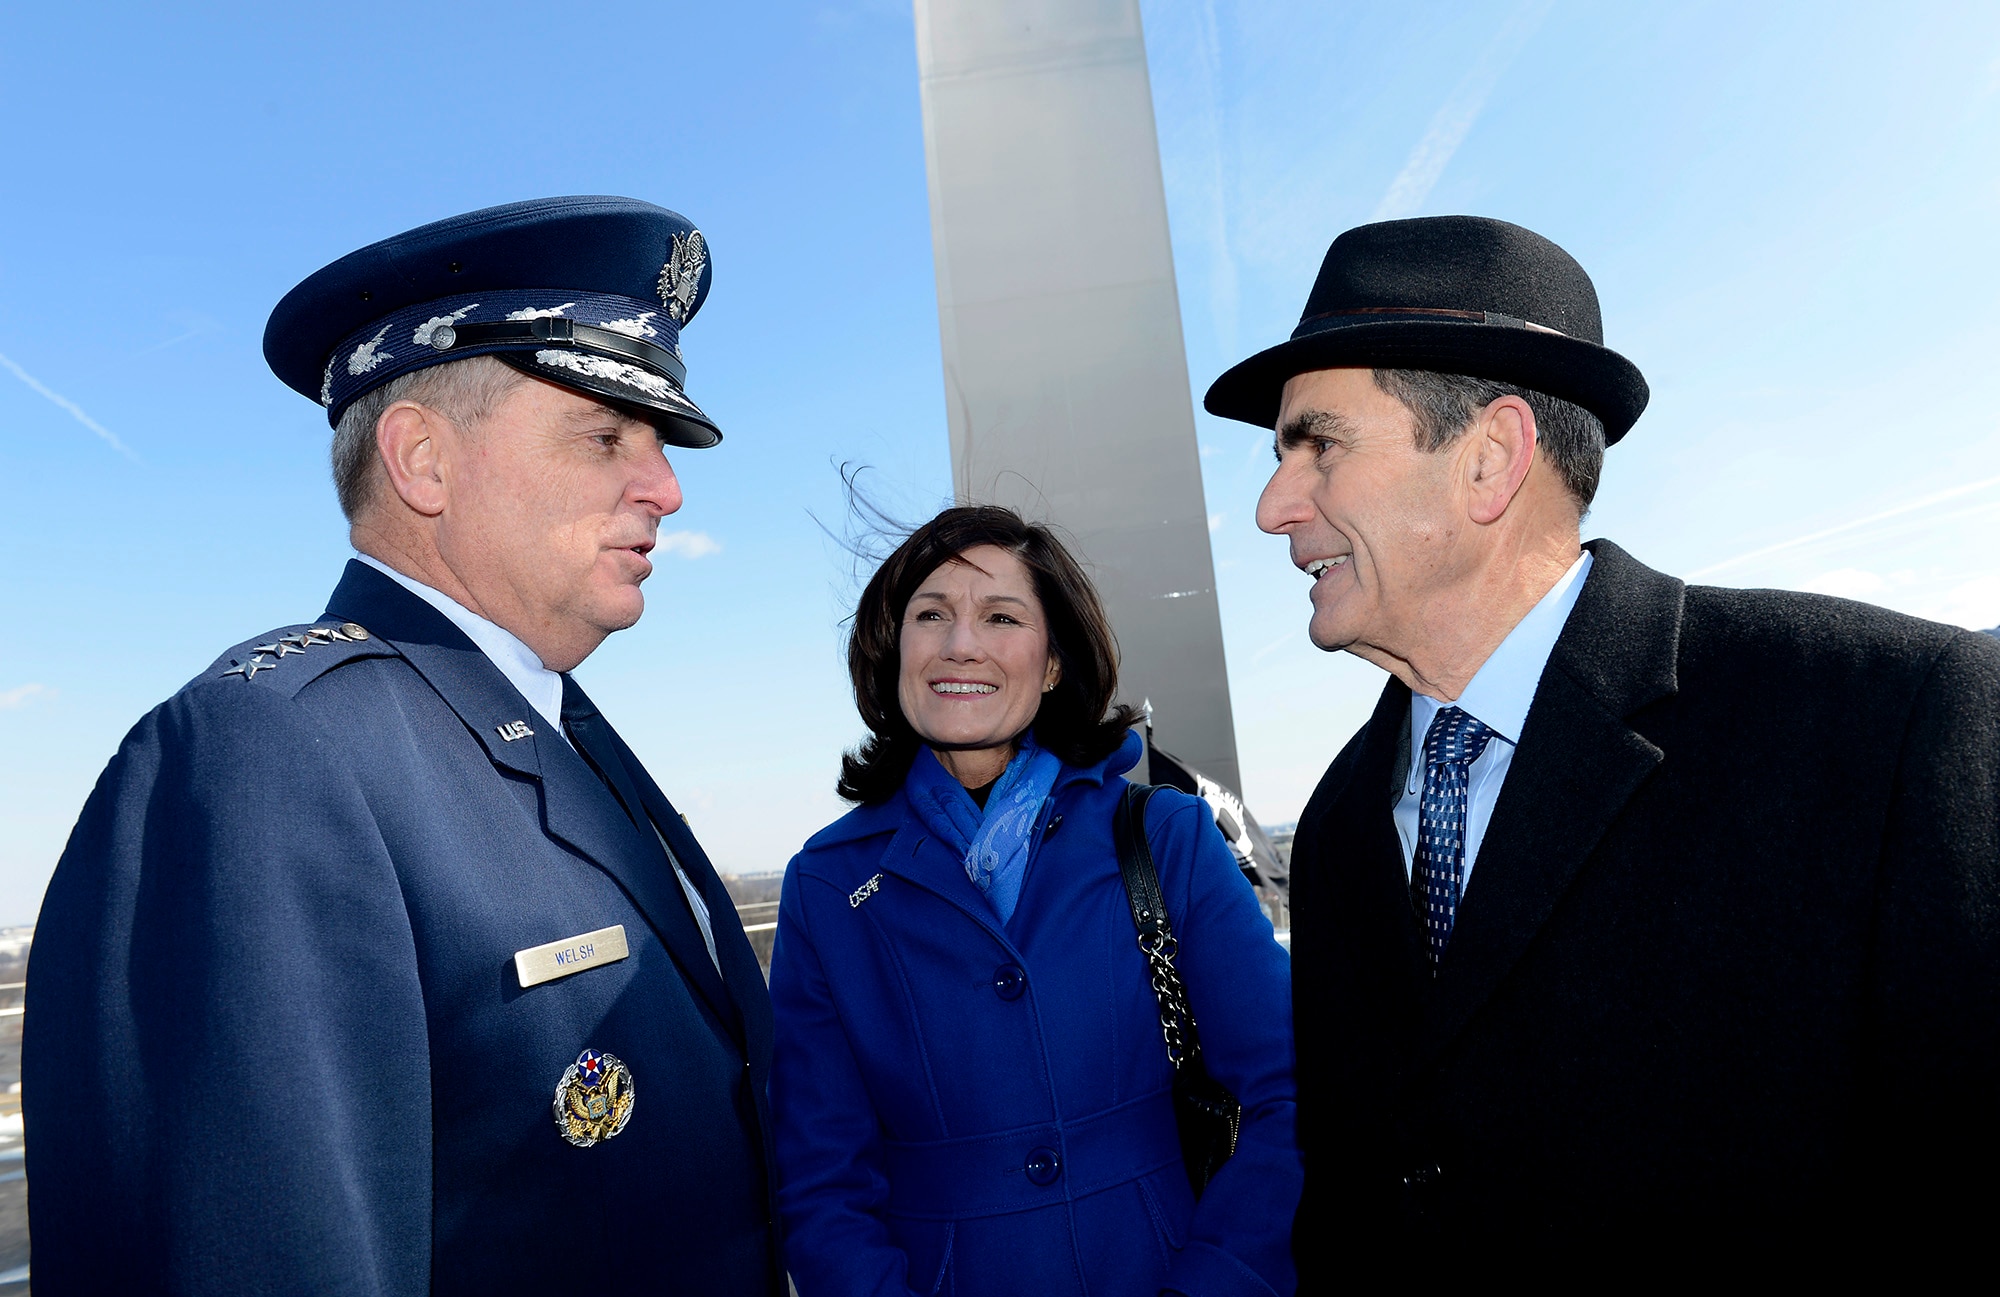 Air Force Chief of Staff Gen. Mark A. Welsh III and his wife, Betty, speak with retired Col. Leon F. "Lee" Ellis, a former Air Force prisoner of war, following a wreath laying ceremony March 2, 2015, at the Air Force Memorial in Arlington, Va. The ceremony honored Air Force Vietnam POWs and missing in action. (U.S. Air Force photo/Scott M. Ash)